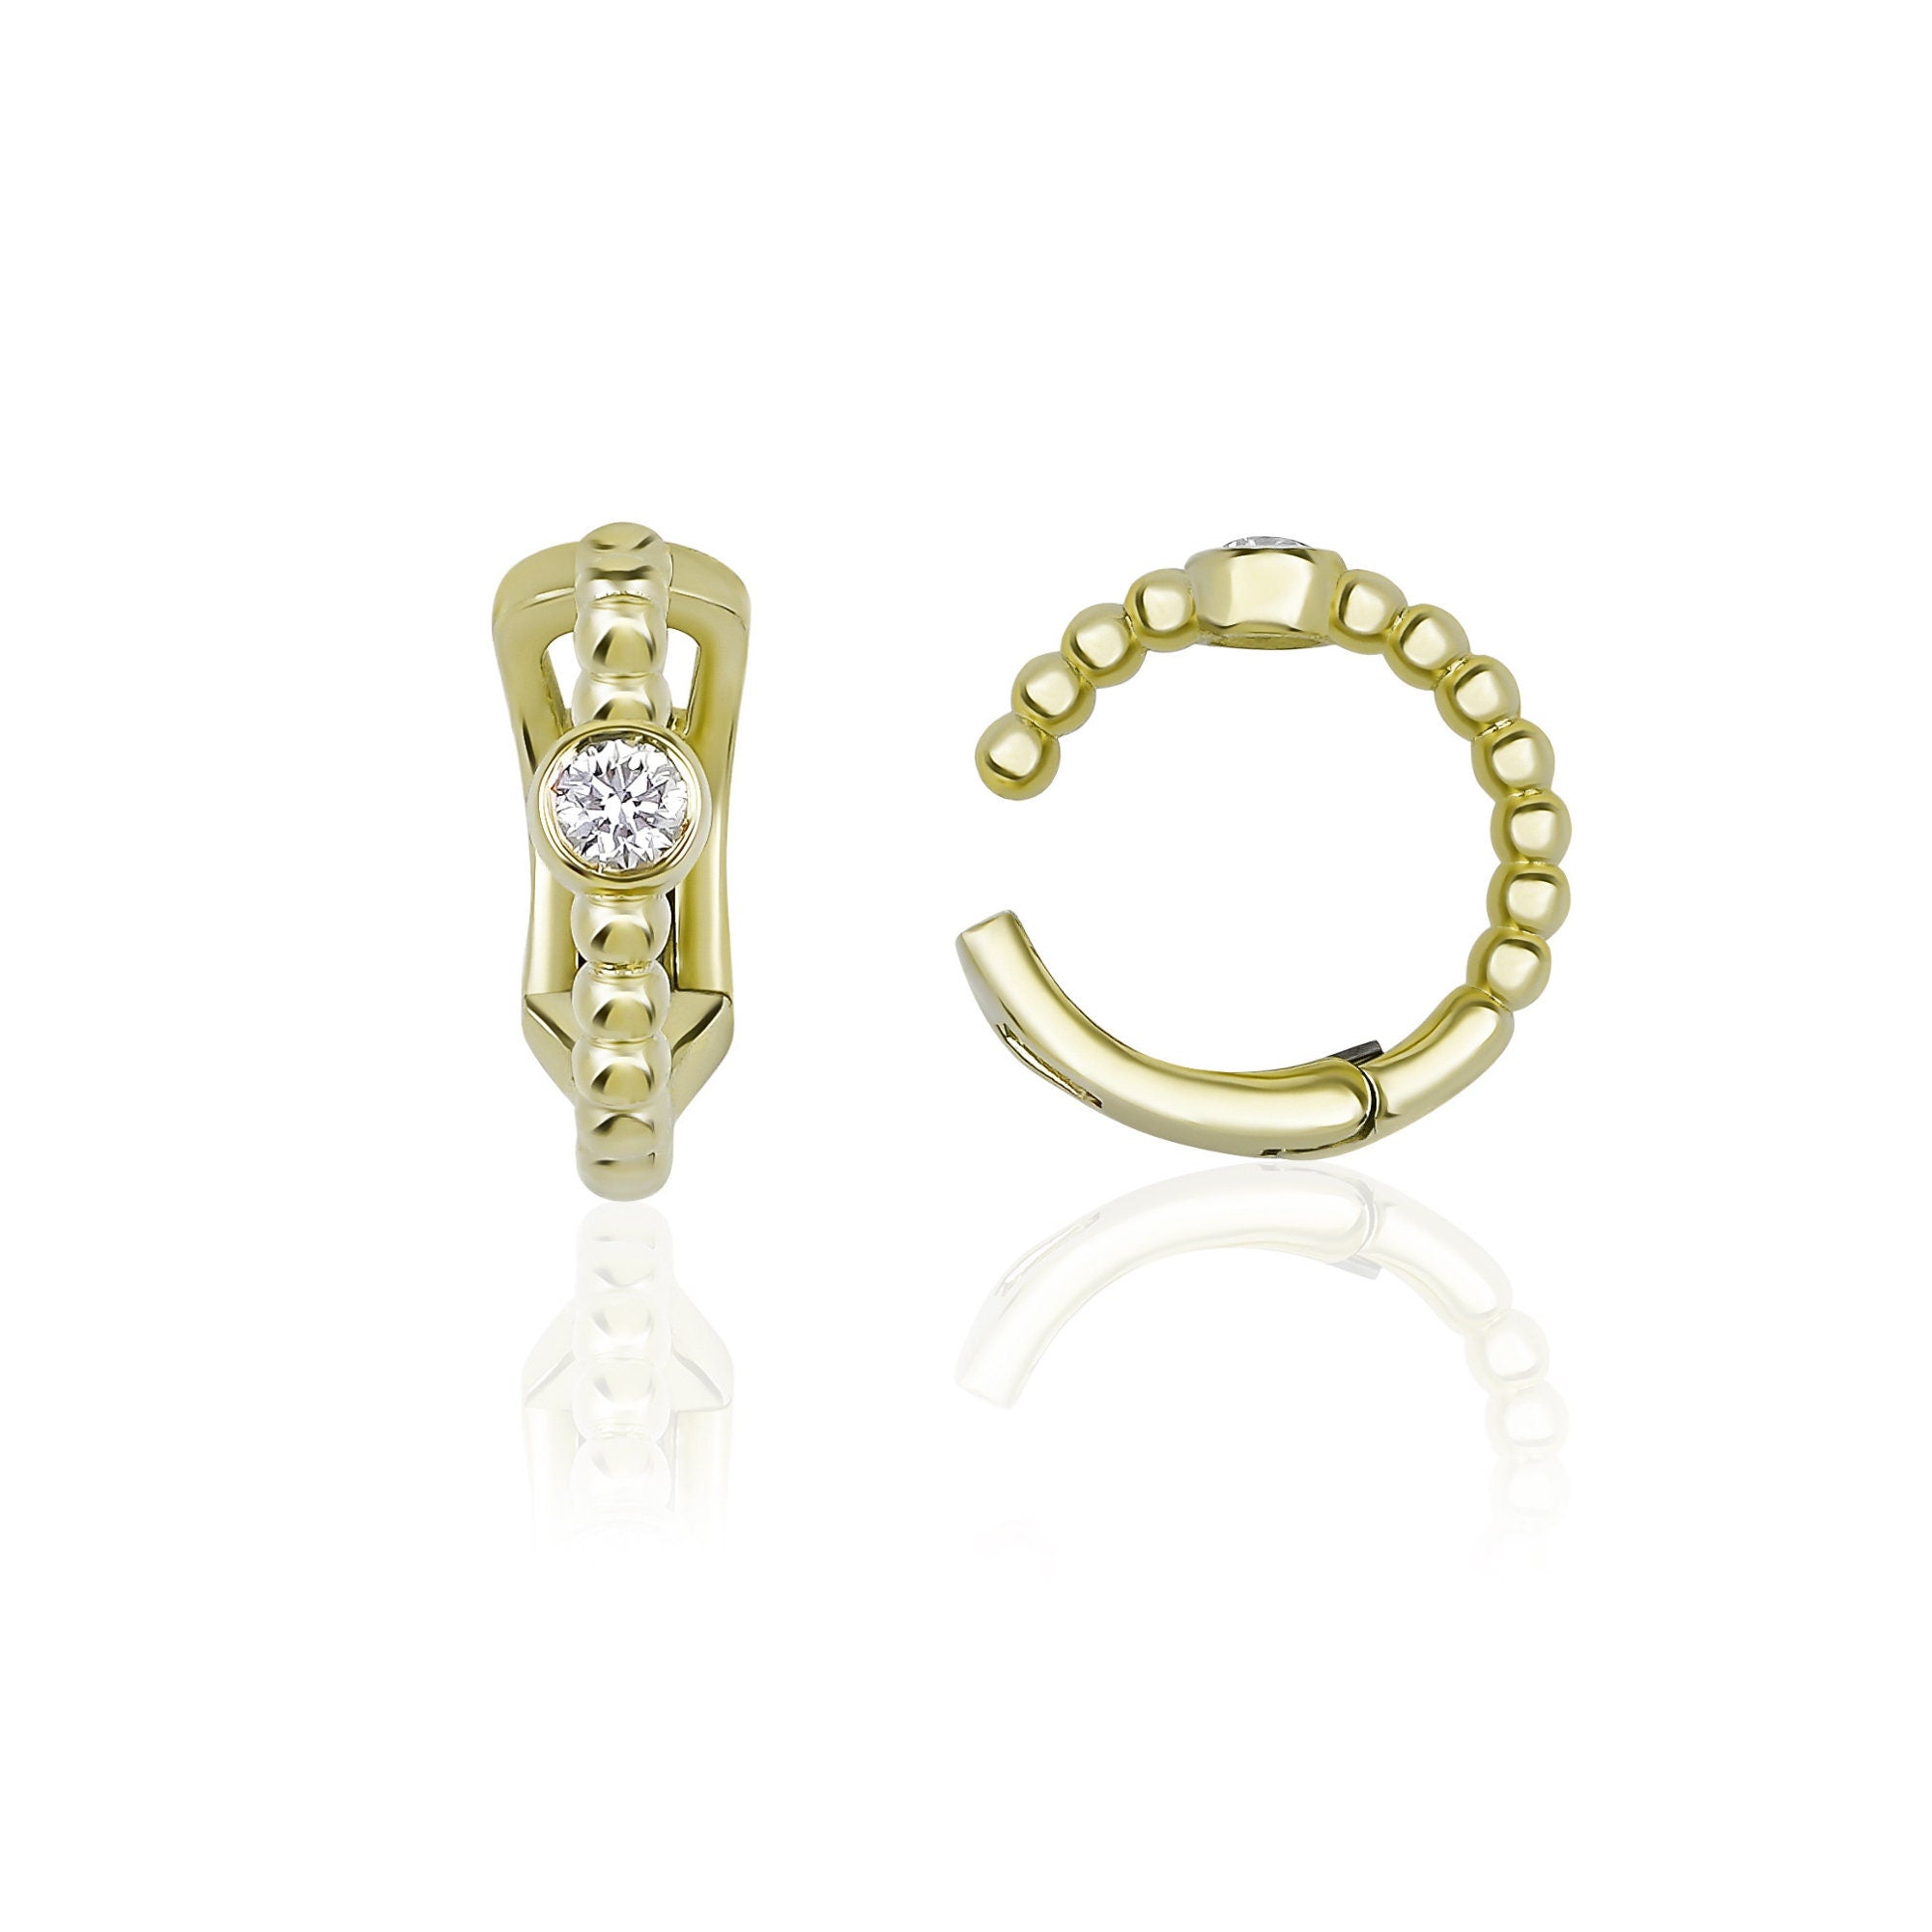 Solitaire Diamond Beaded Ear Cuff Earring Available in 14K and 18K Gold